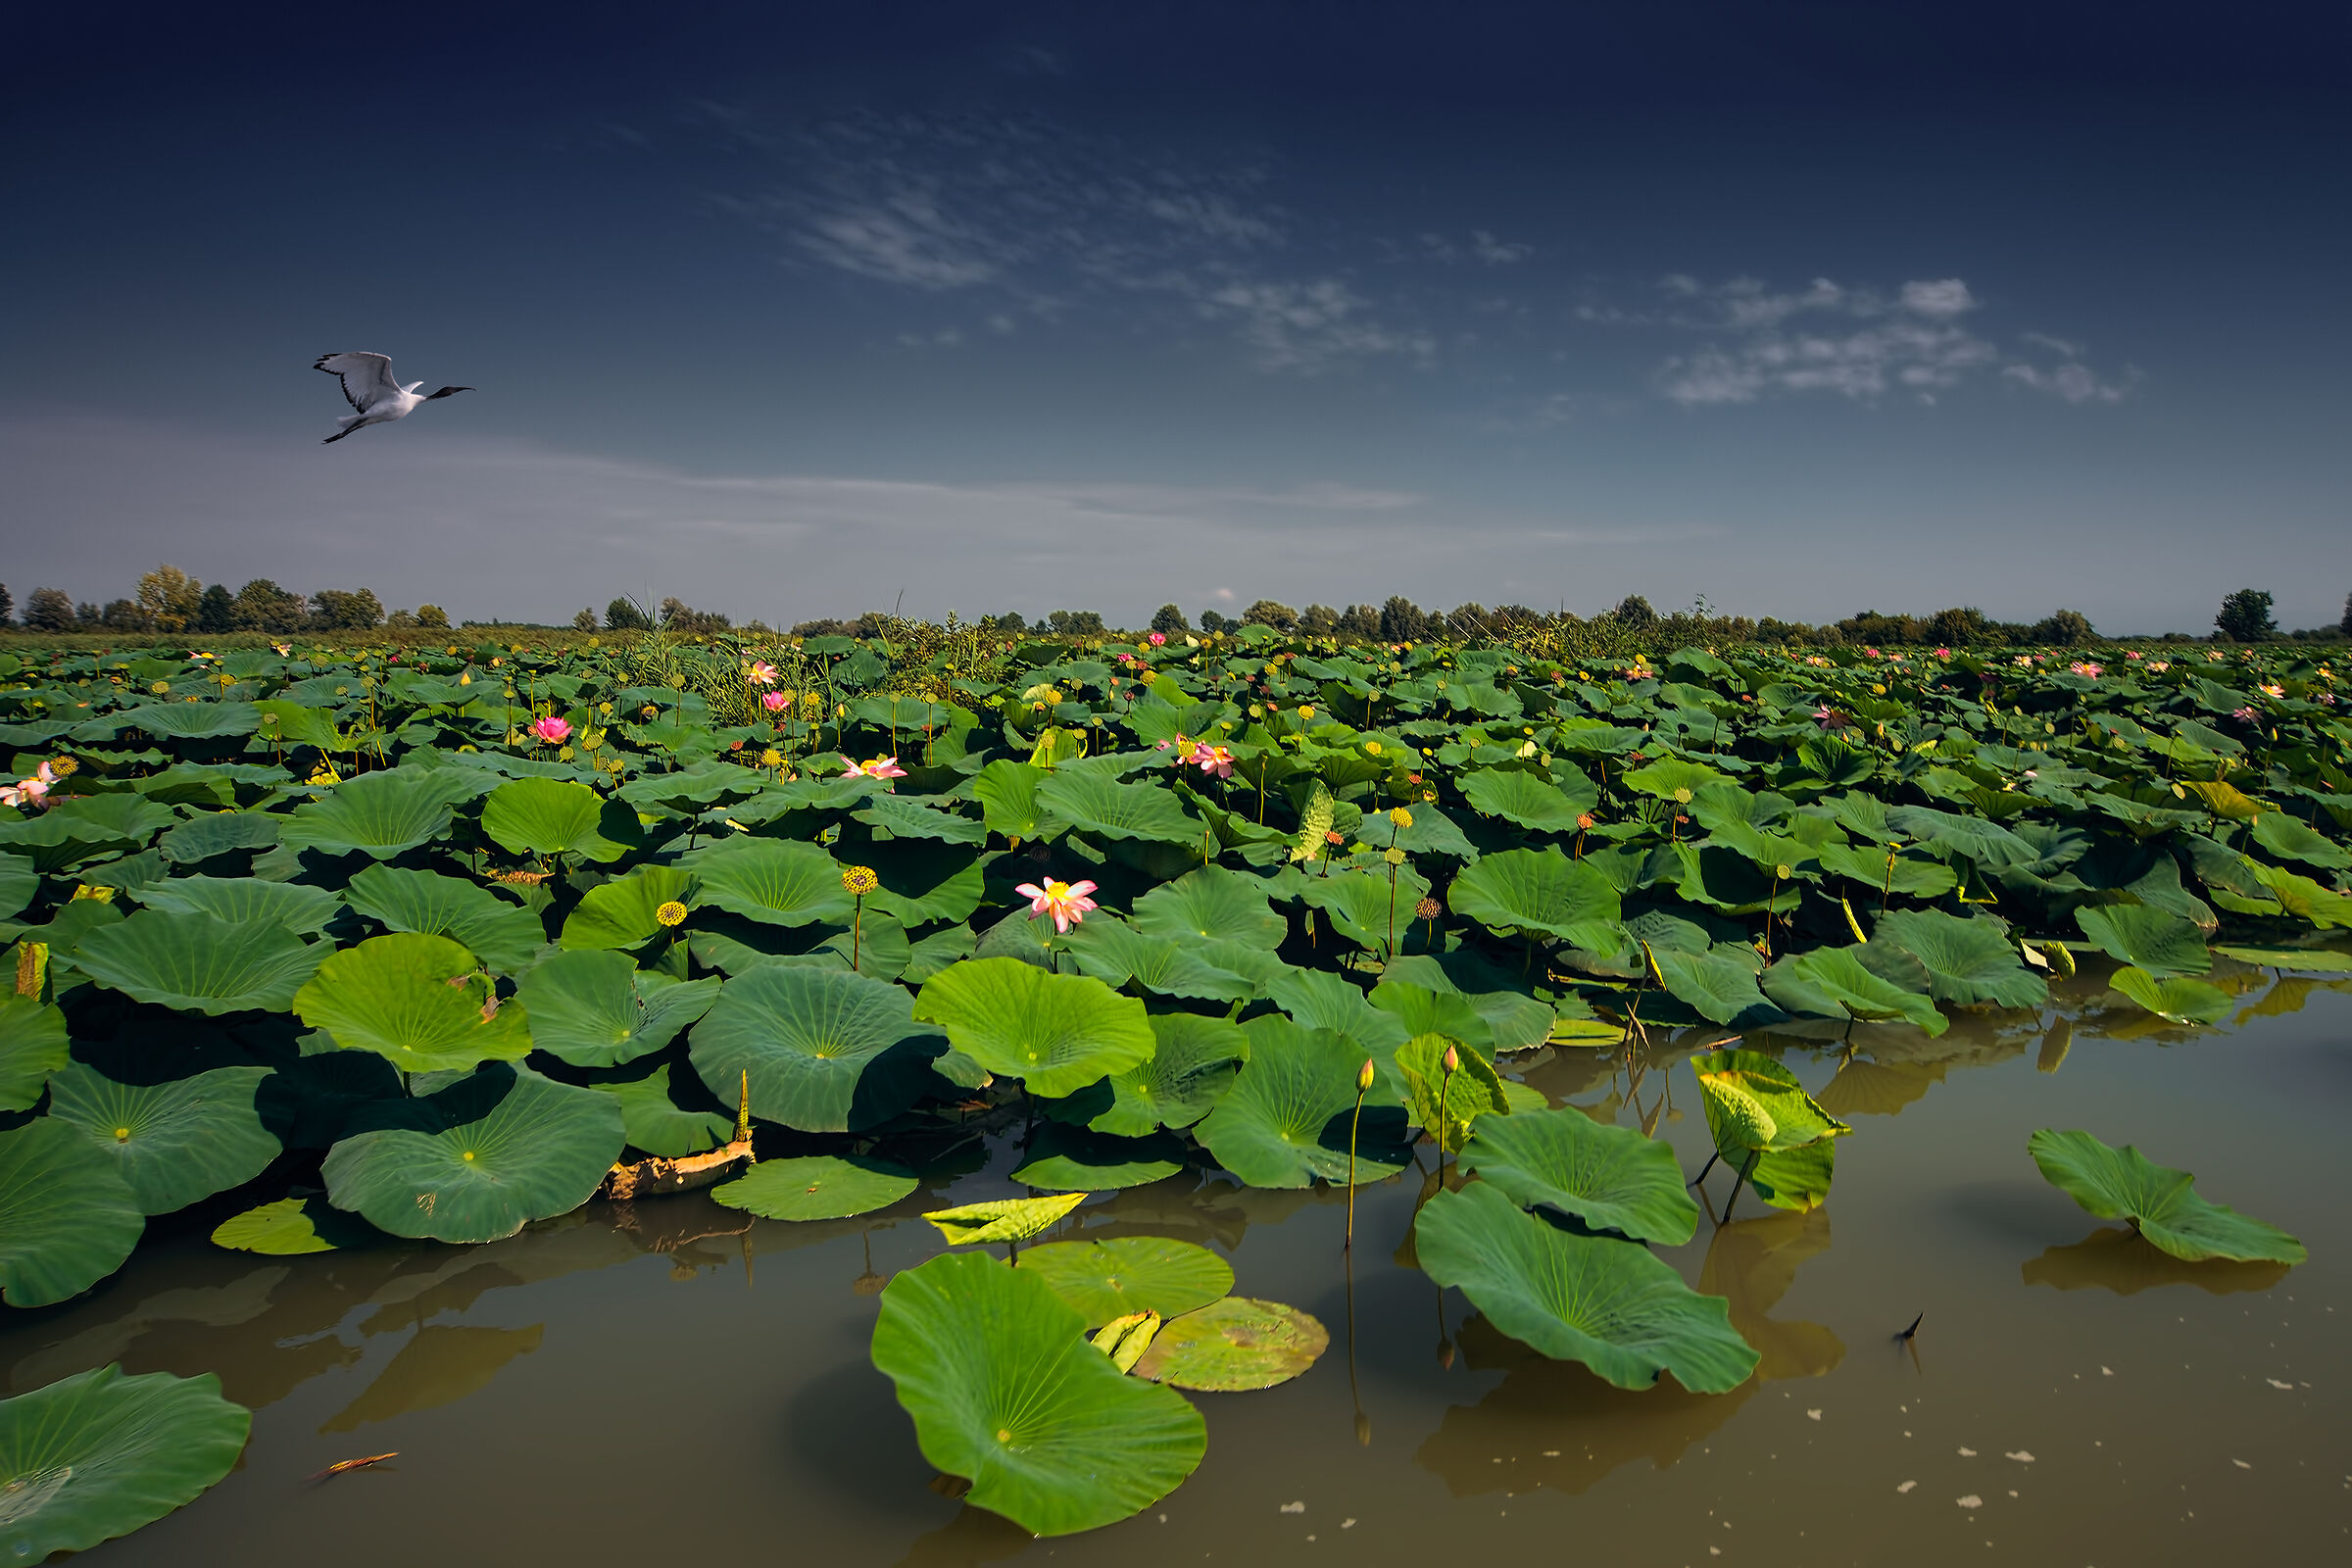 A sacred ibis flies over the lotus bloom...